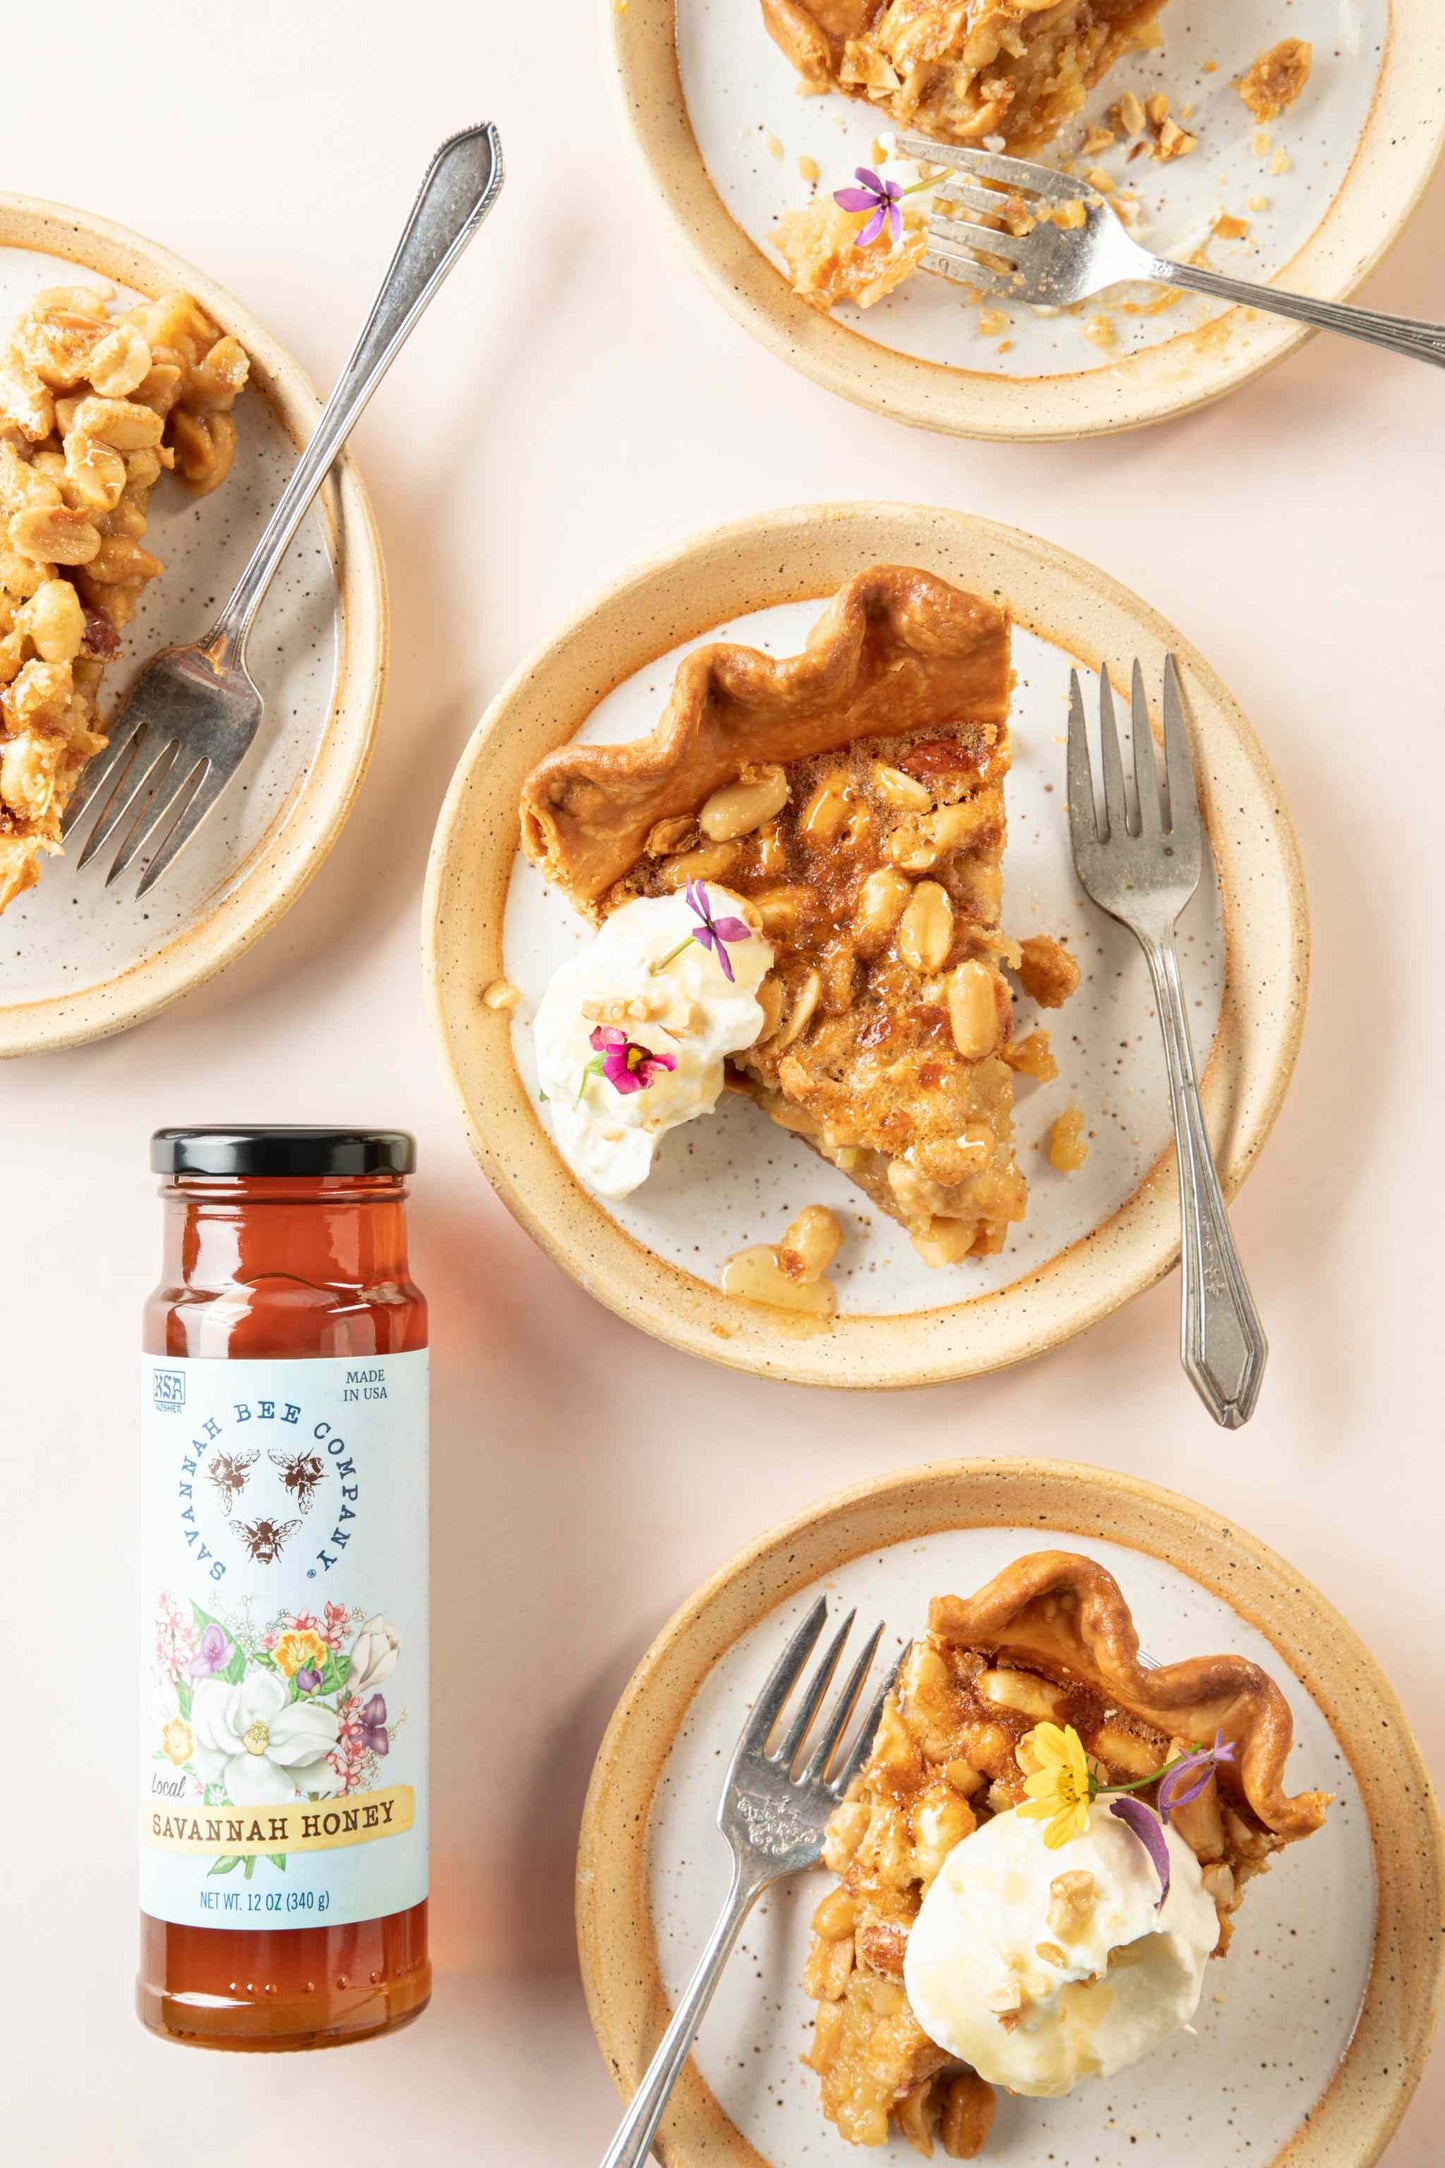 Four plates of sliced peanut pie with whipped cream next to a jar of Savannah Honey 12 ounce.